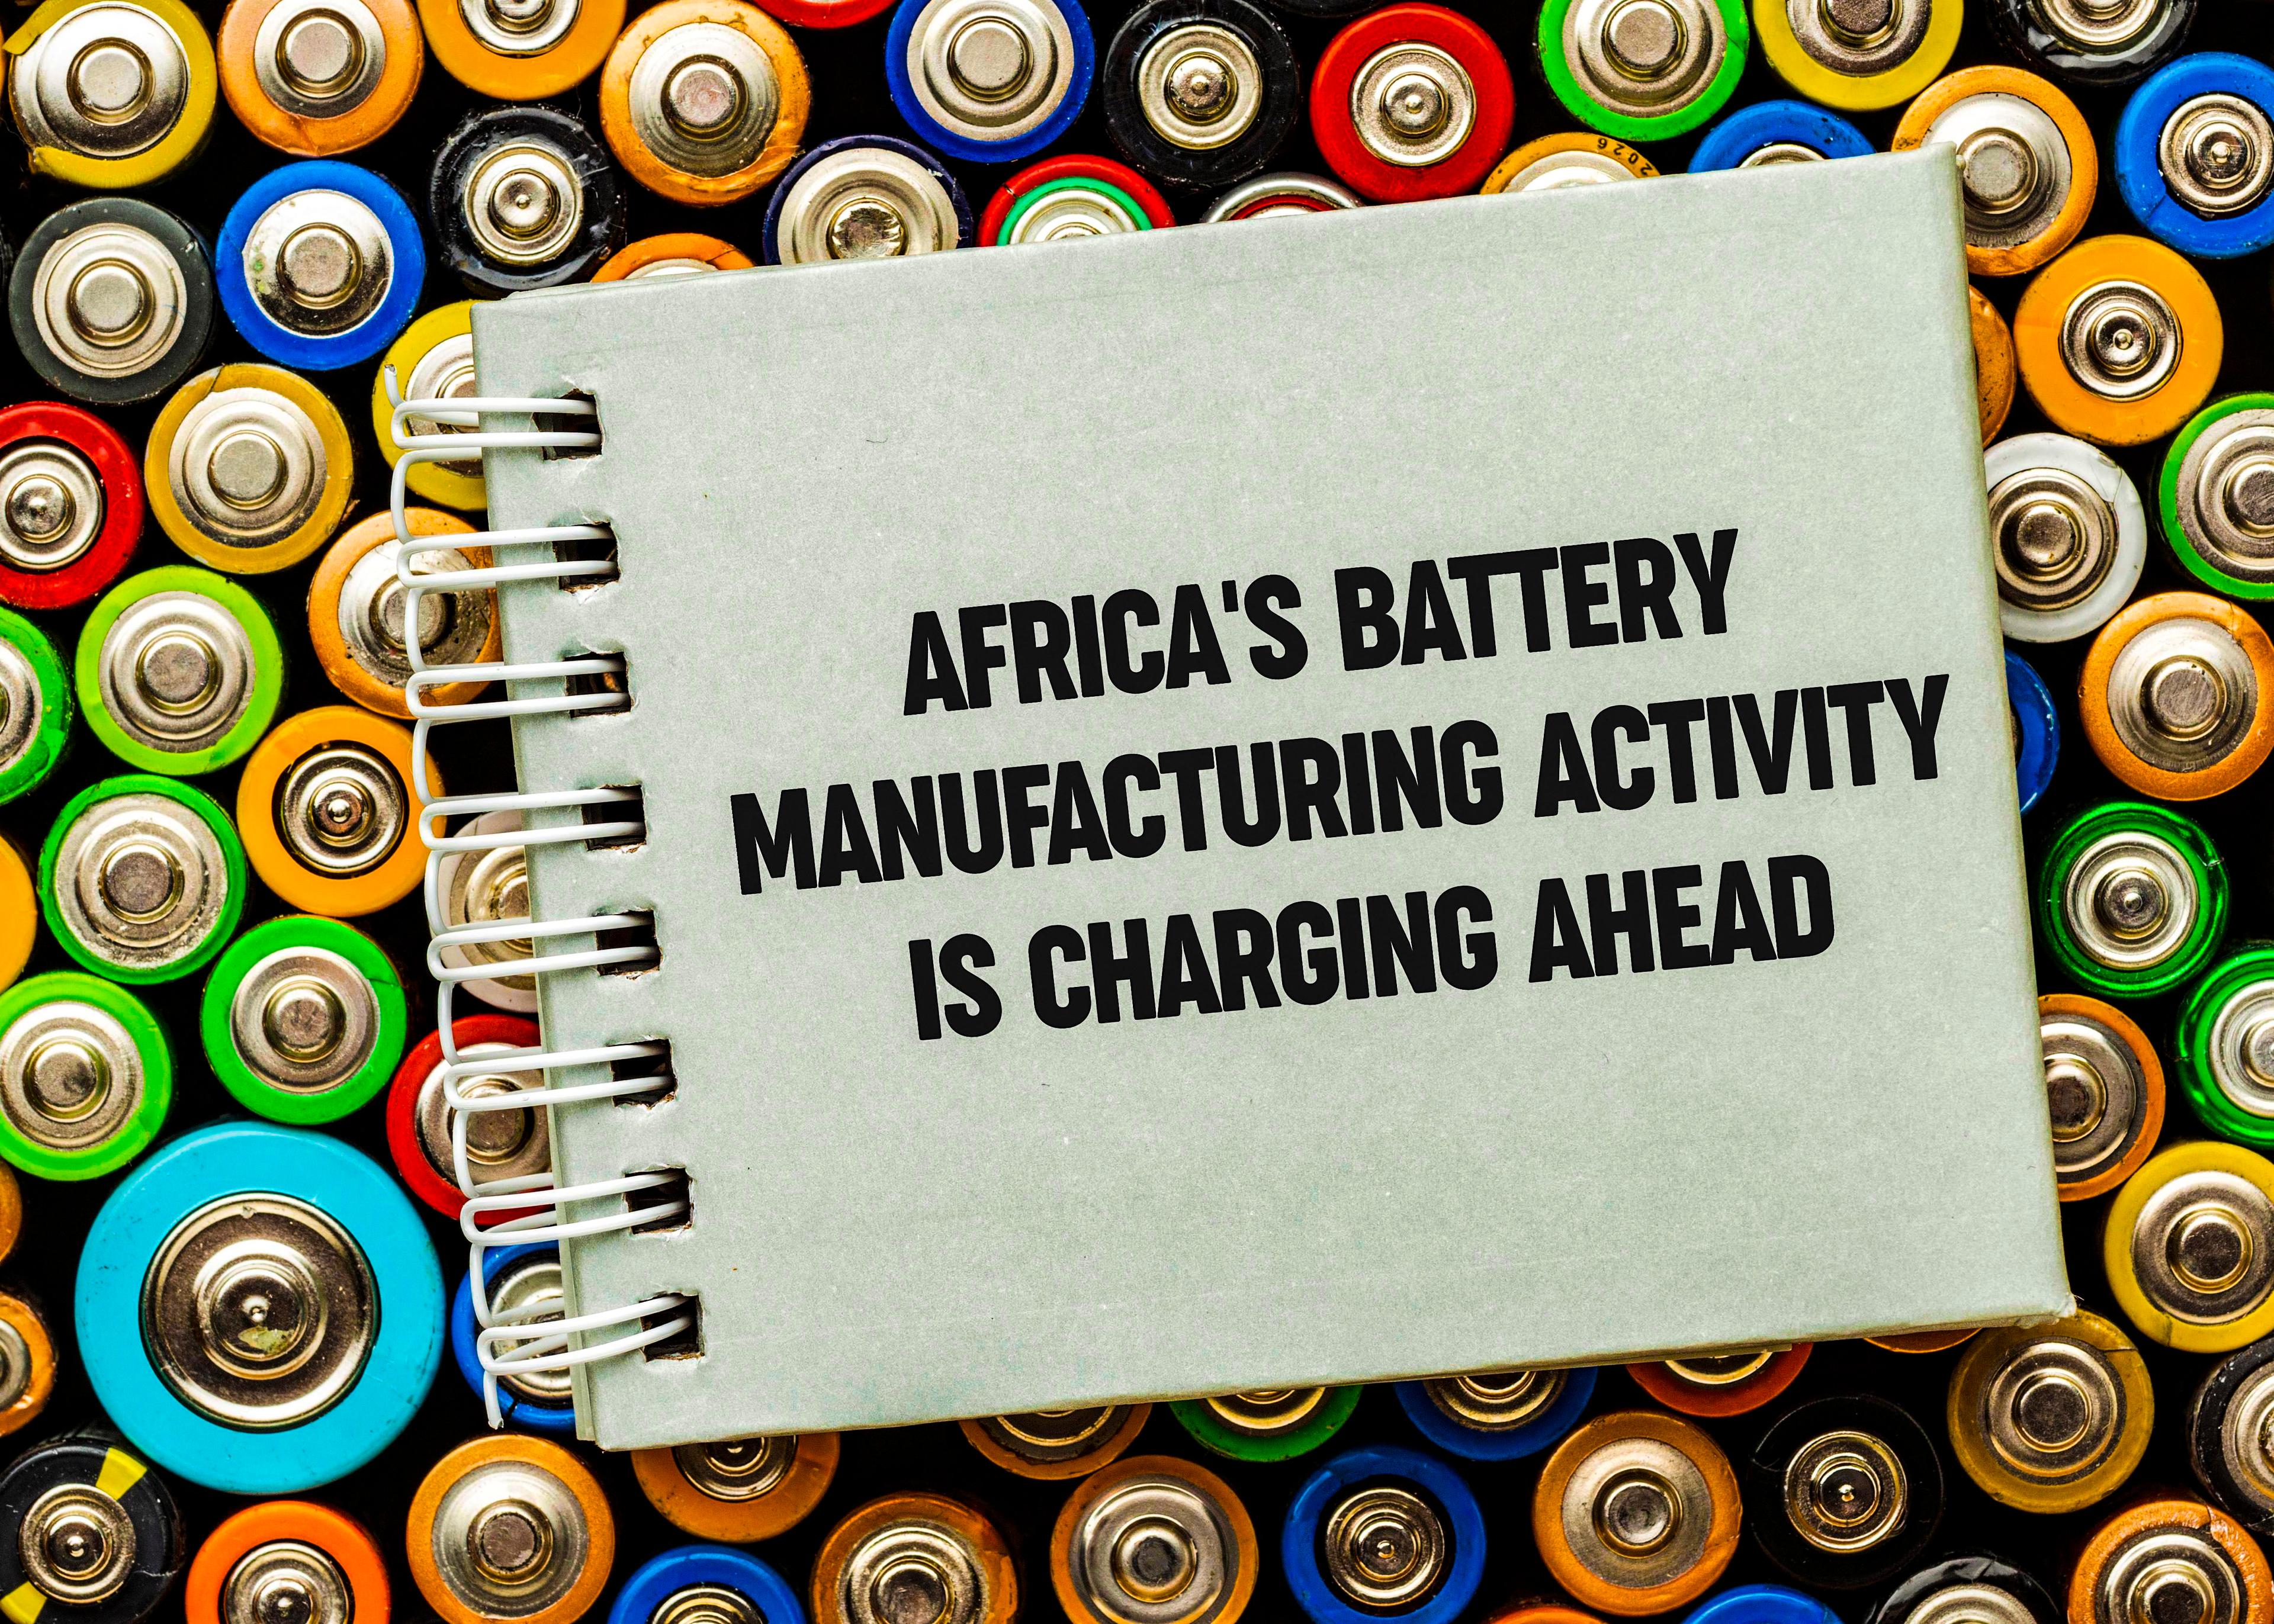 Africa's battery manufacturing activity is charging ahead 🌍🪫⚡